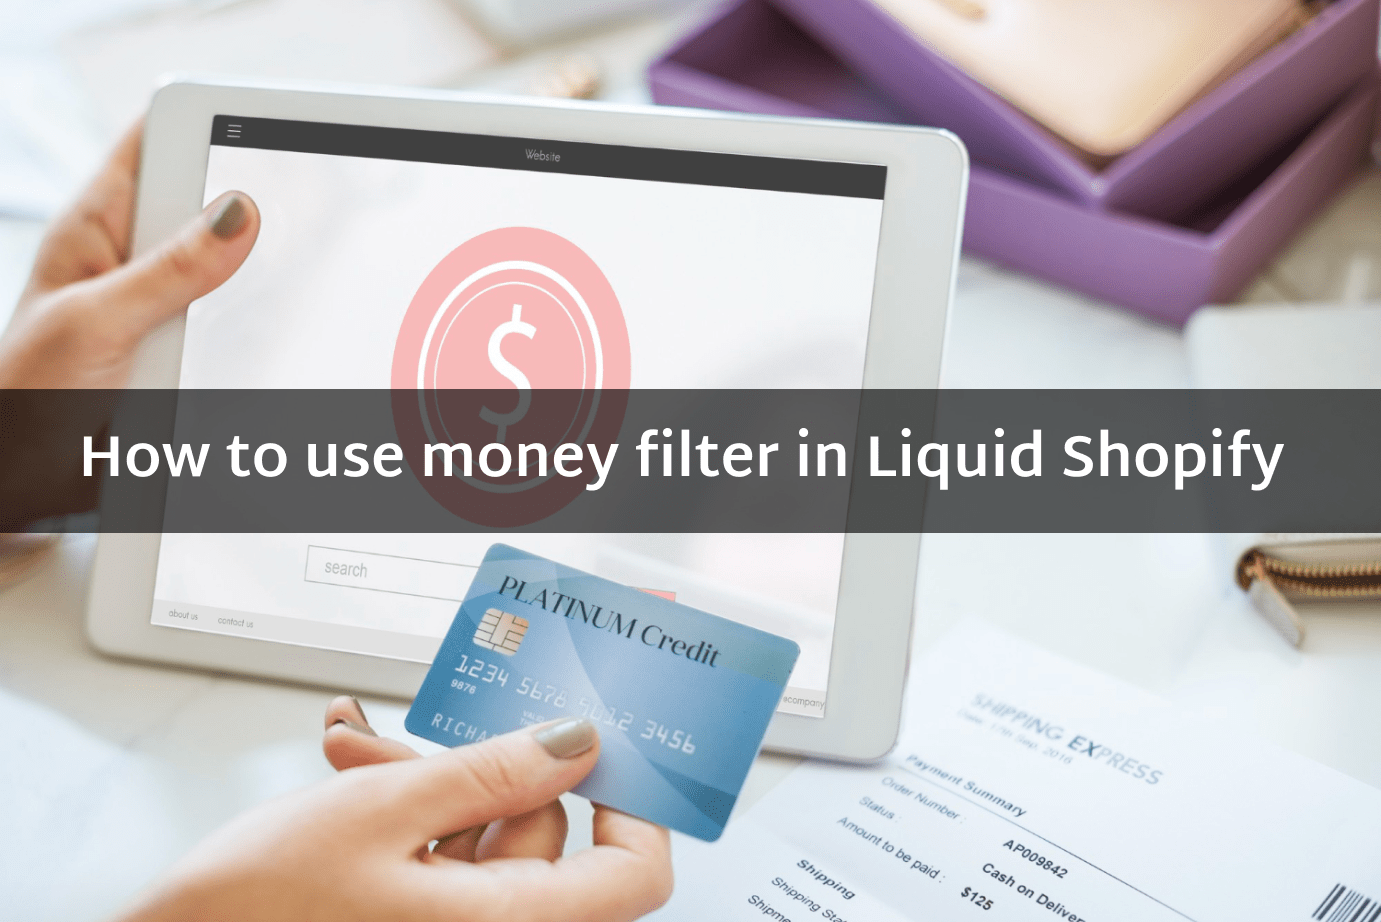 How to use money filter in Liquid Shopify